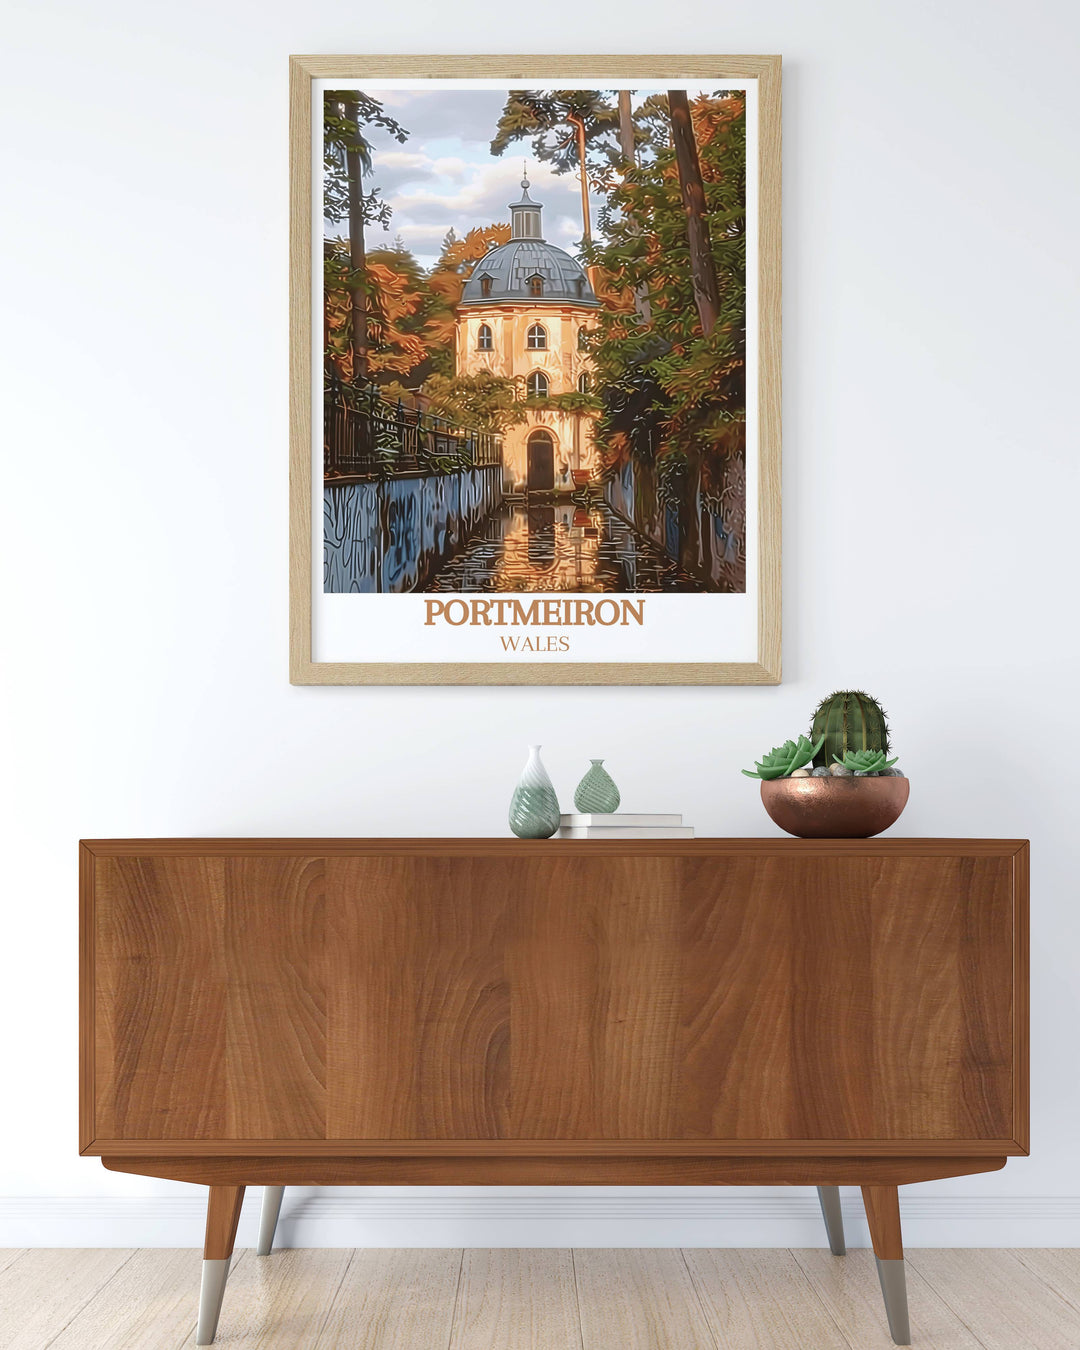 The Pantheon Posters capture the timeless beauty of one of Romes best preserved monuments. Perfect for adding a touch of Roman architectural mastery to your living space, these prints are a celebration of history and design.